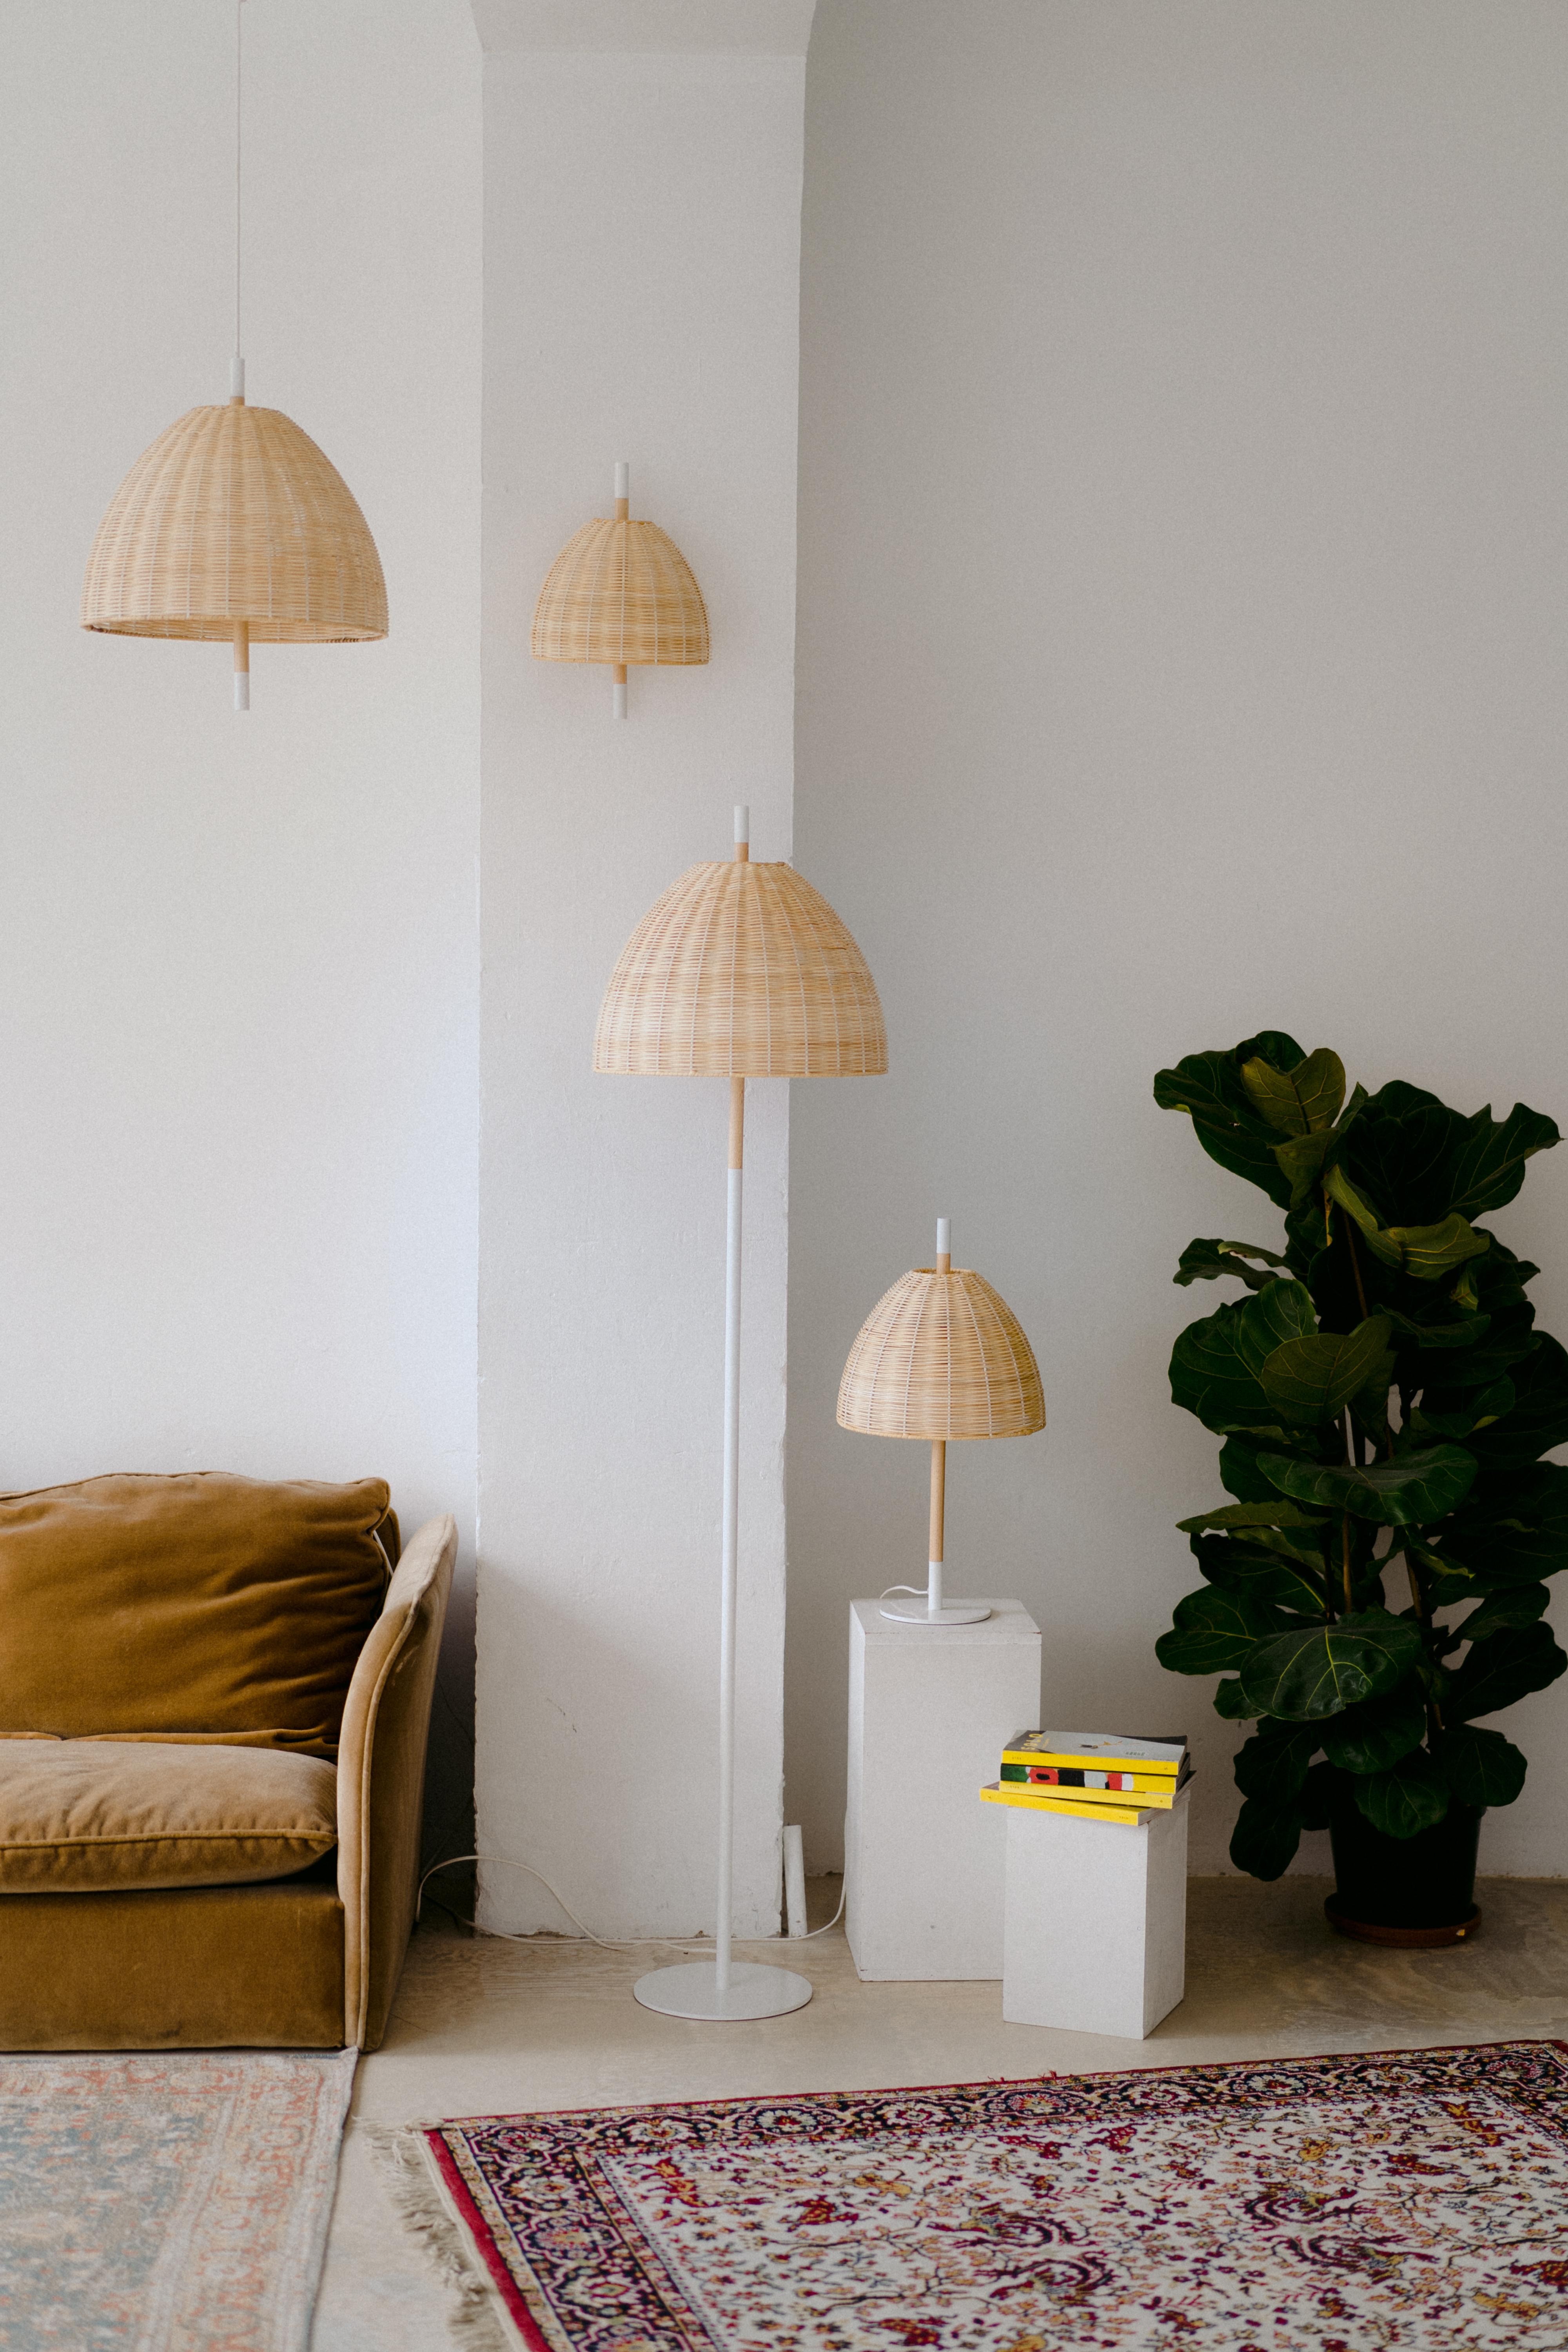 AMÀ - Floor lamp

Amà , comes from the Catalan '' a mà '', which means '' handmade '', and it is how this contemporary lamp is made. With hand-turned beech wood, white metal details, and hand-woven lampshade in natural rattan.
Mediterranean, simple,